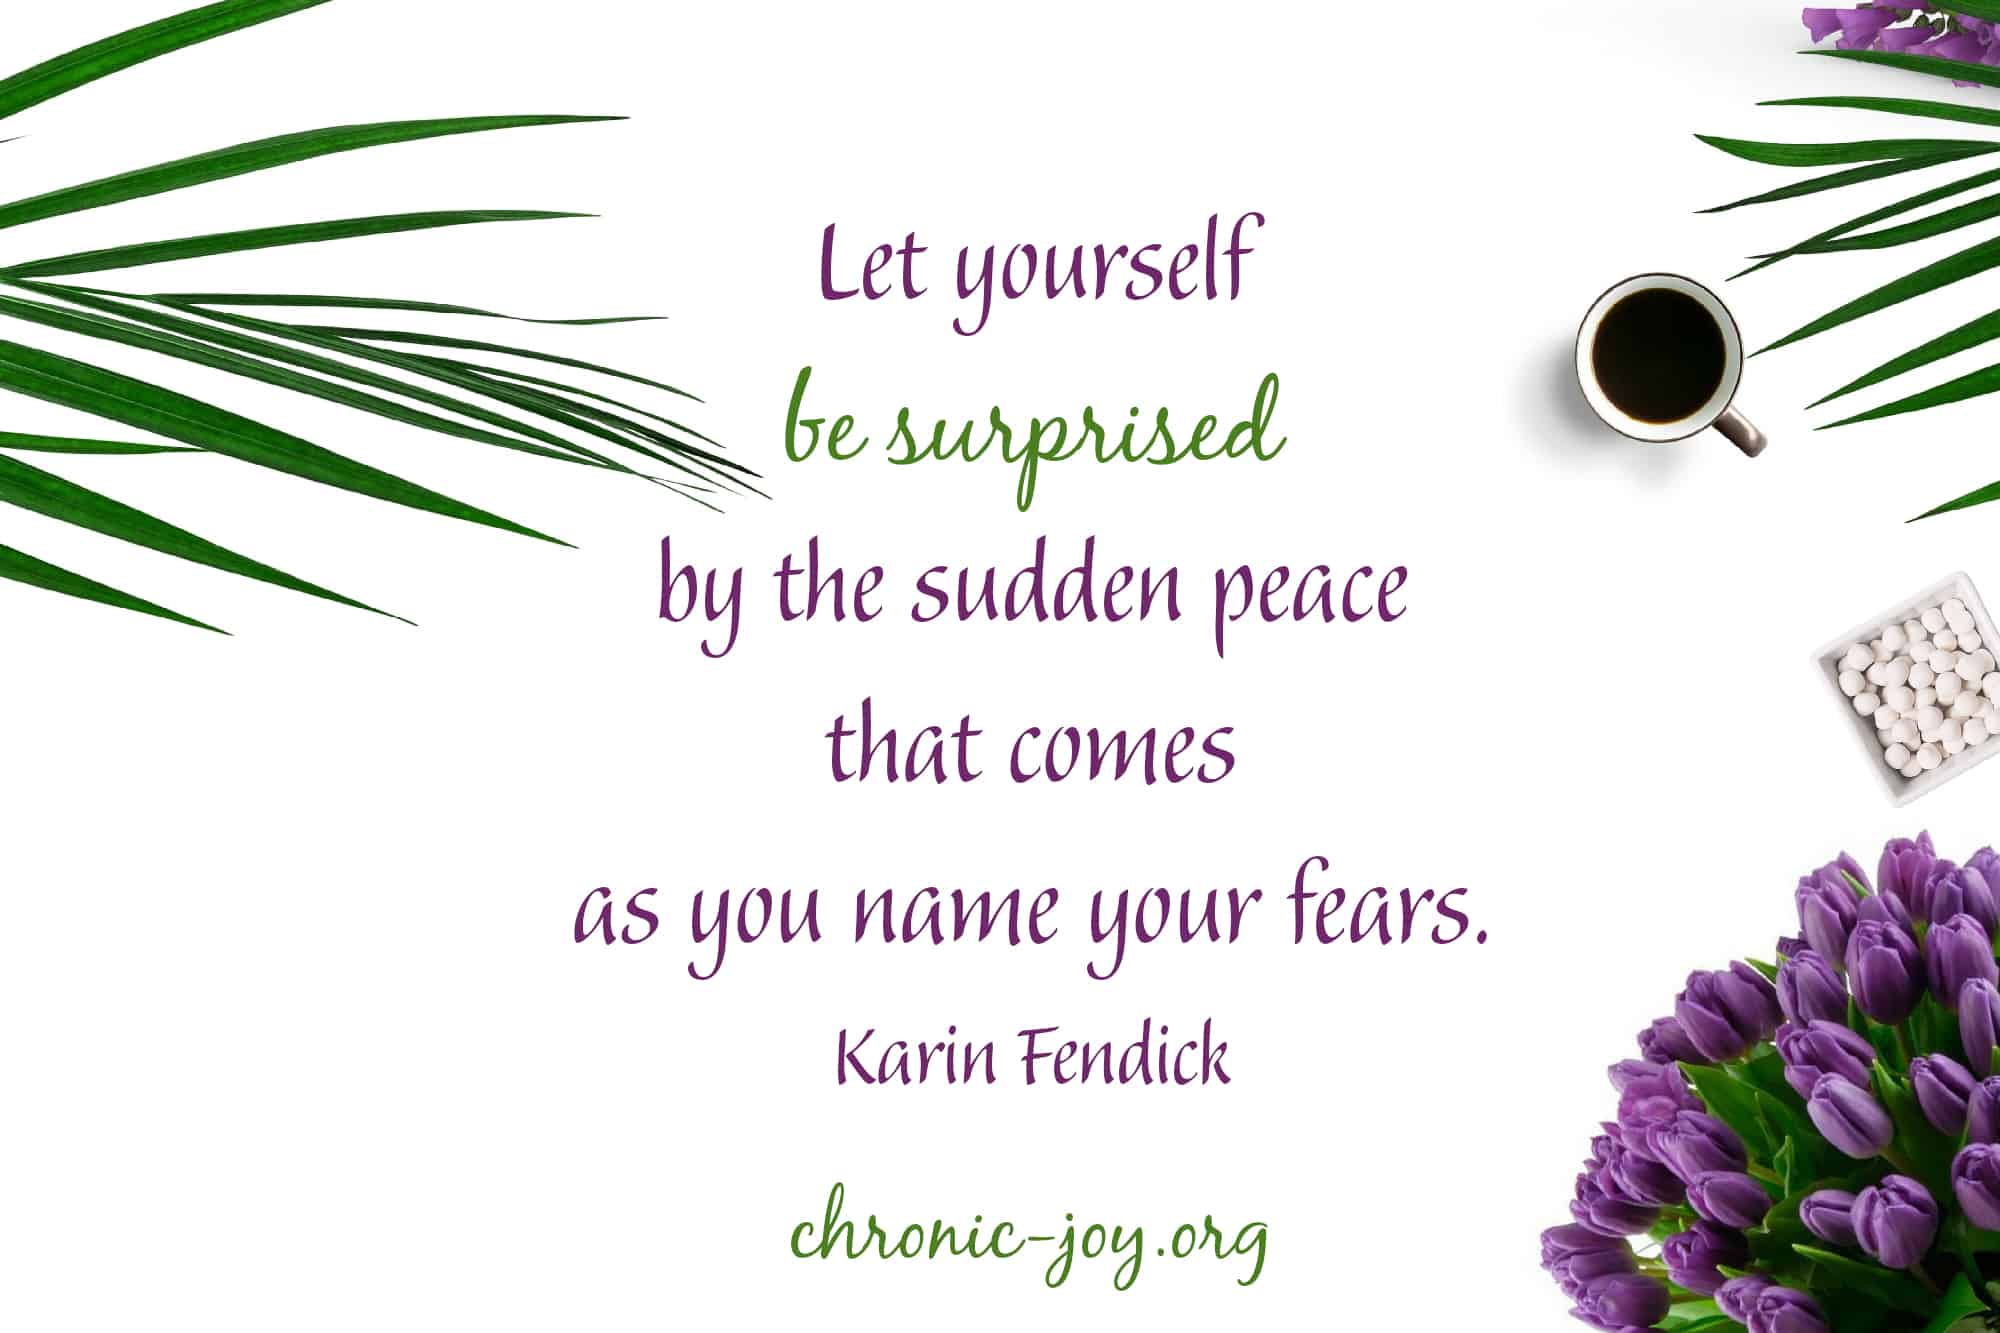 Let yourself be surprised by the sudden peace that comes as you name your fears. ~ Karin Fendick